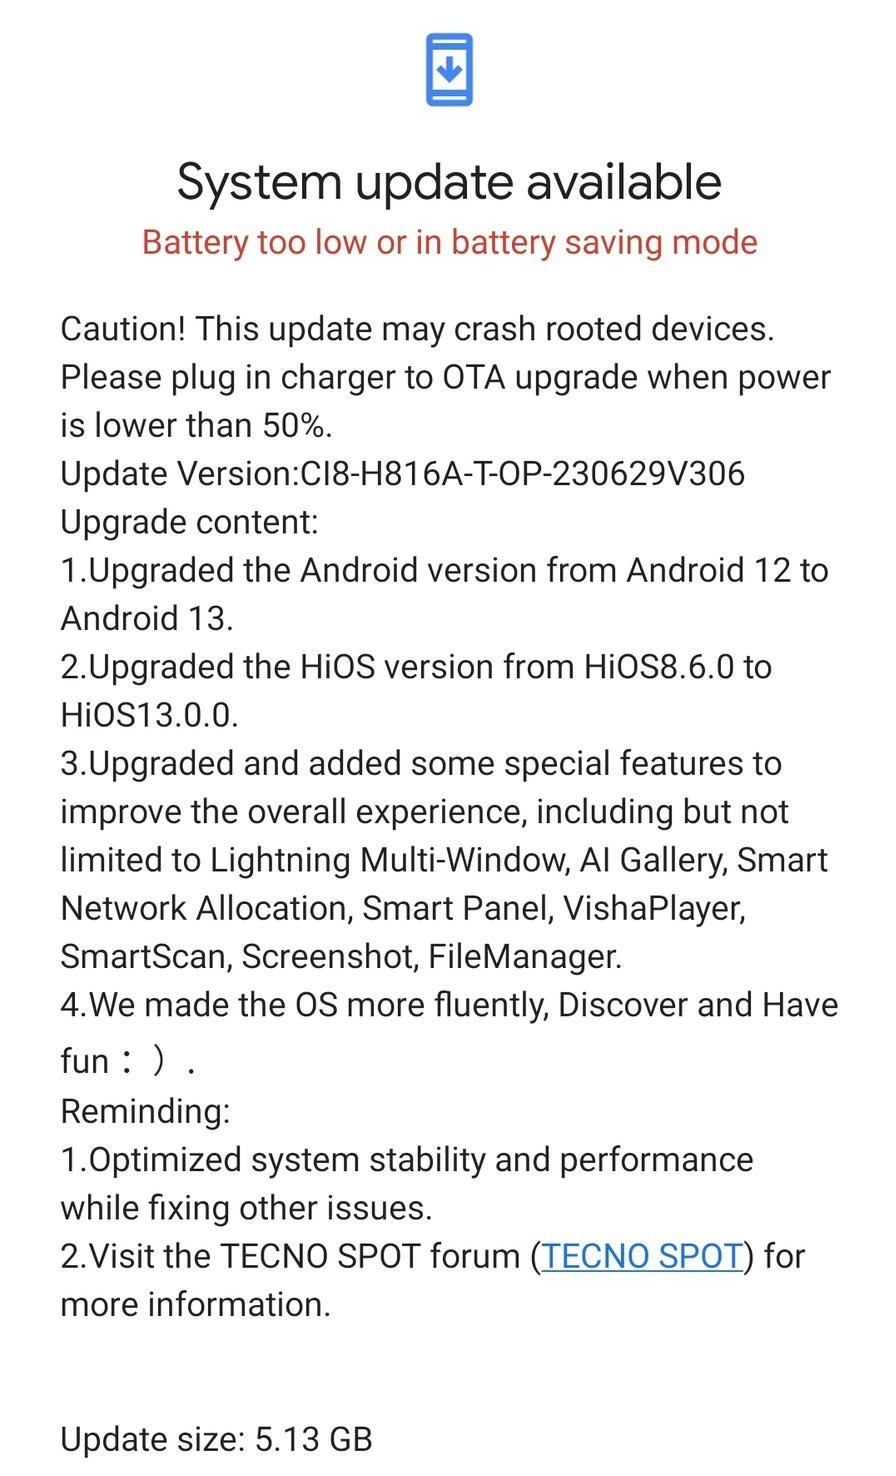 Tecno Camon 19 Pro 4G Model Now Receiving Google Android 13 Update Based on HiOS Version 13 Google Android 13 update now sending to owners of Tecno Camon 19 Pro 4G model